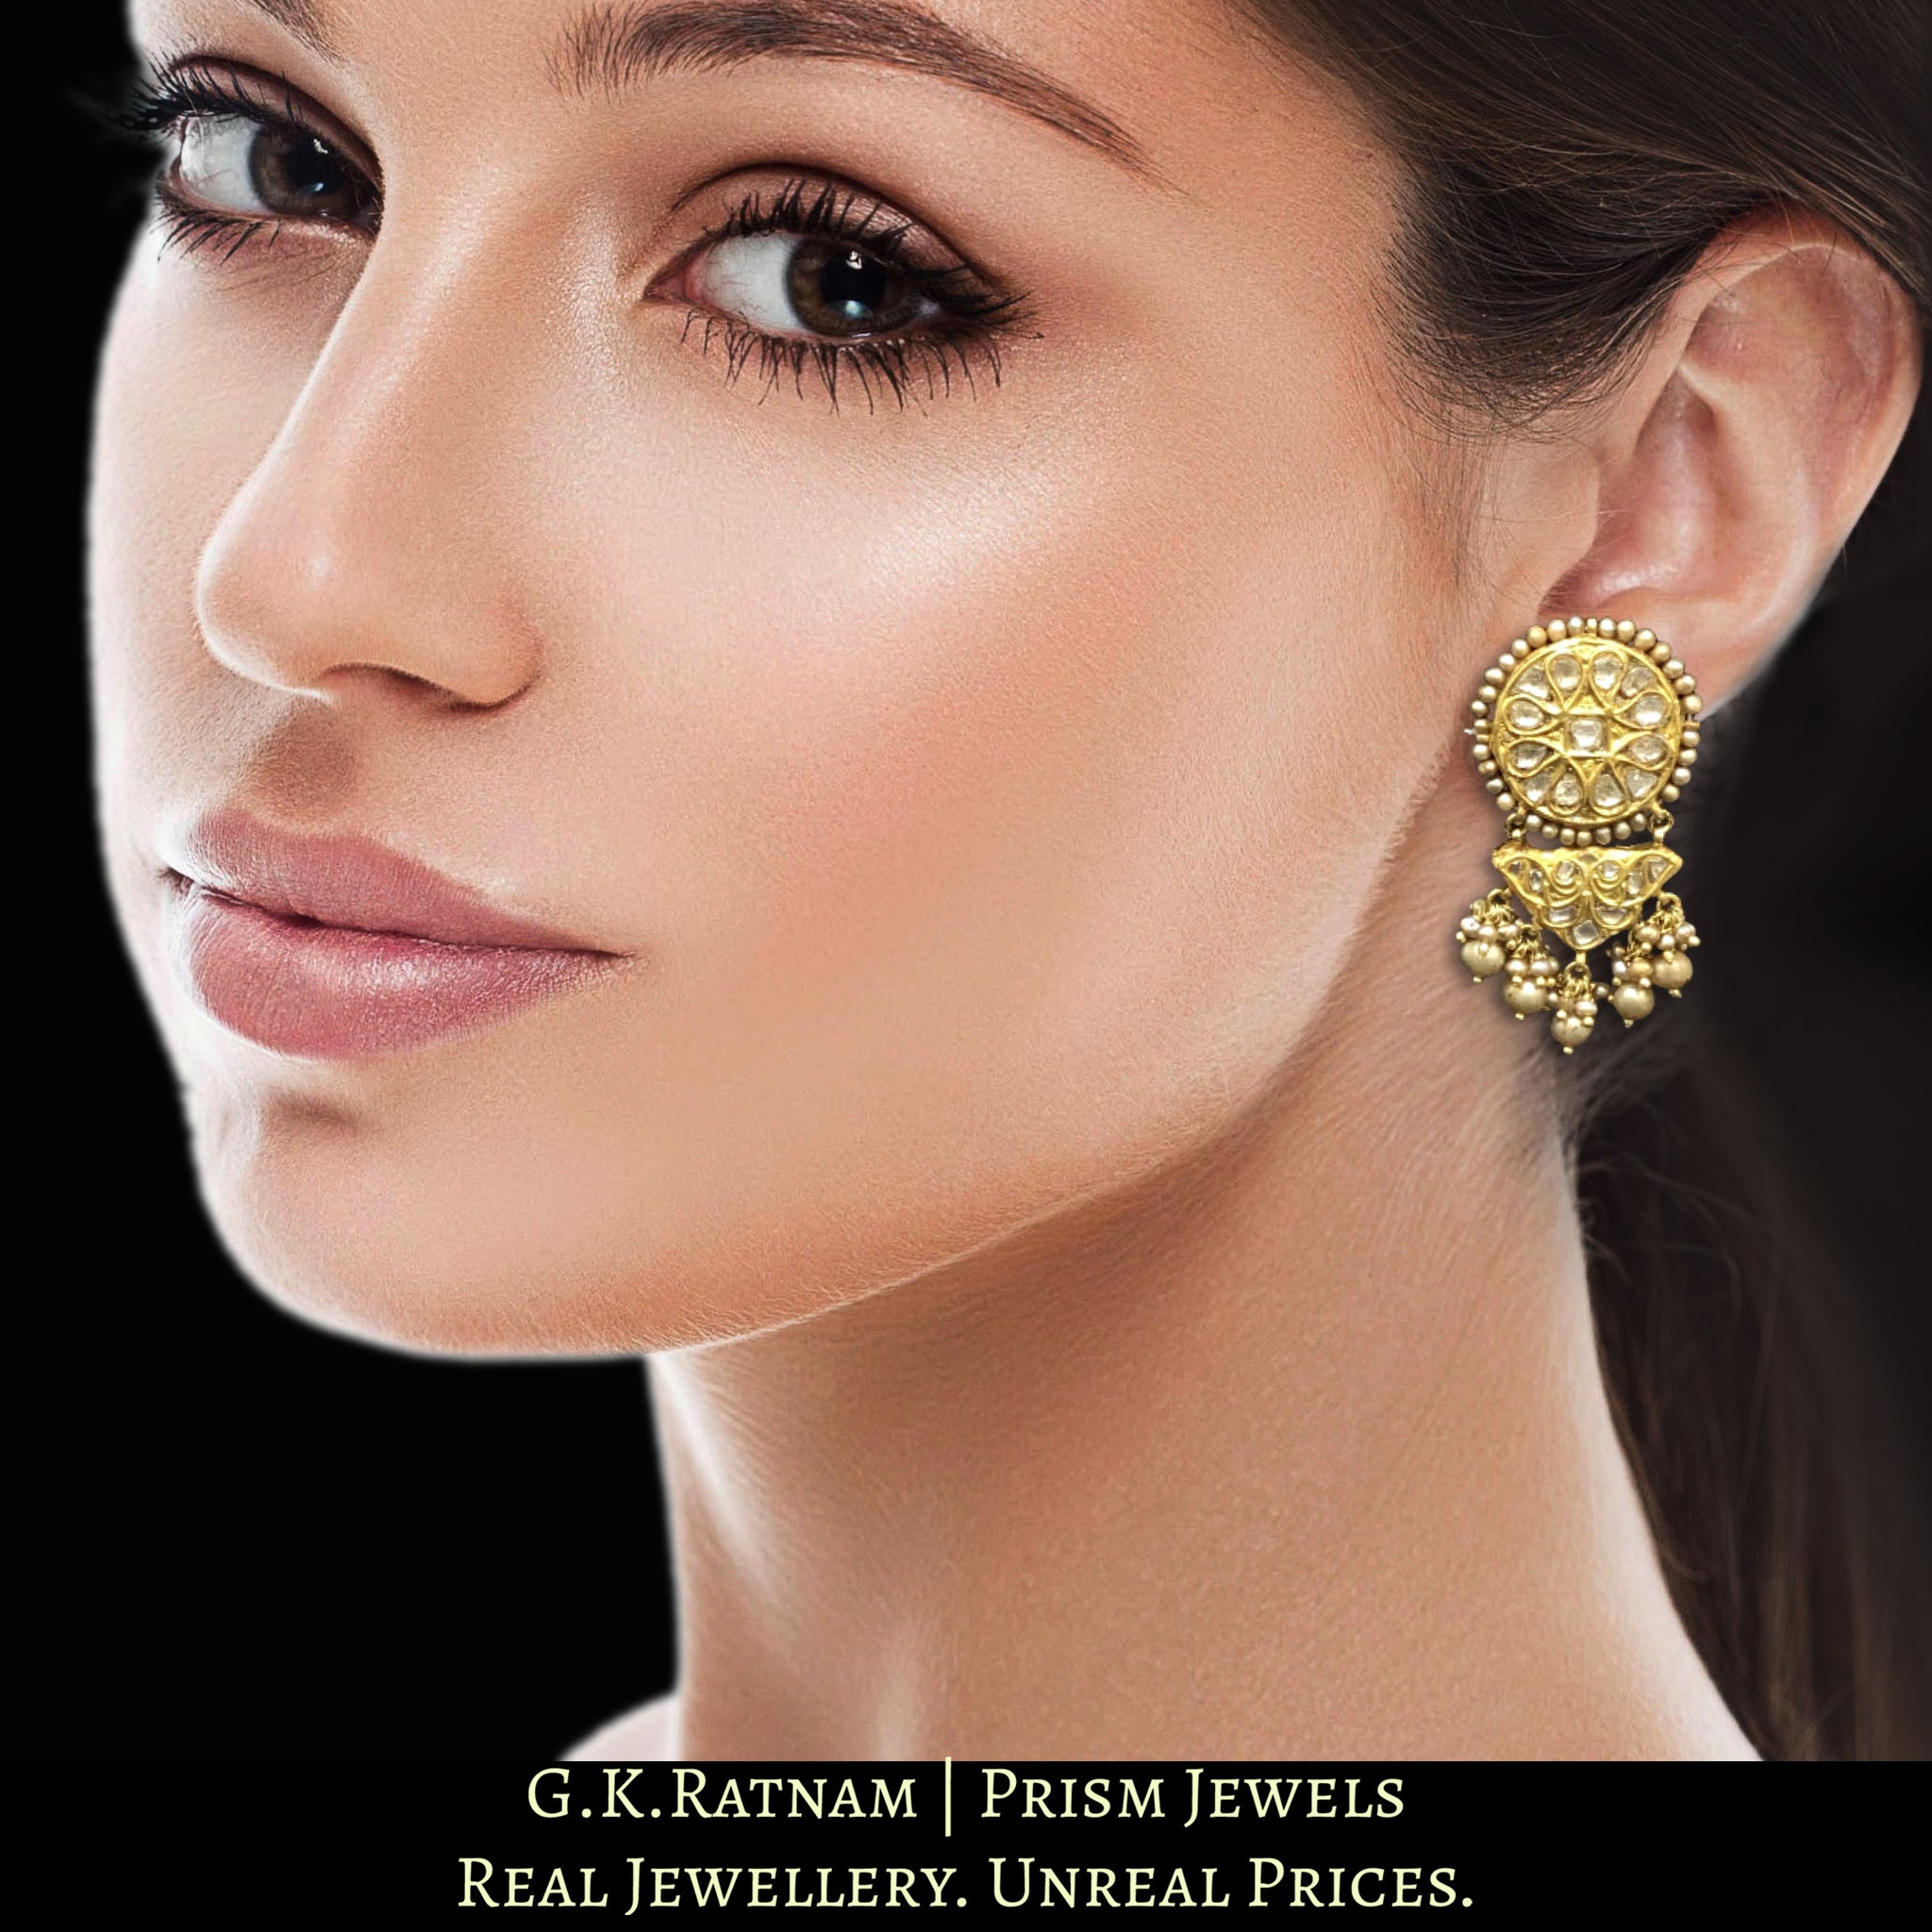 23k Gold and Diamond Polki Long Earring Pair with Antiqued Hyderabadi Pearls